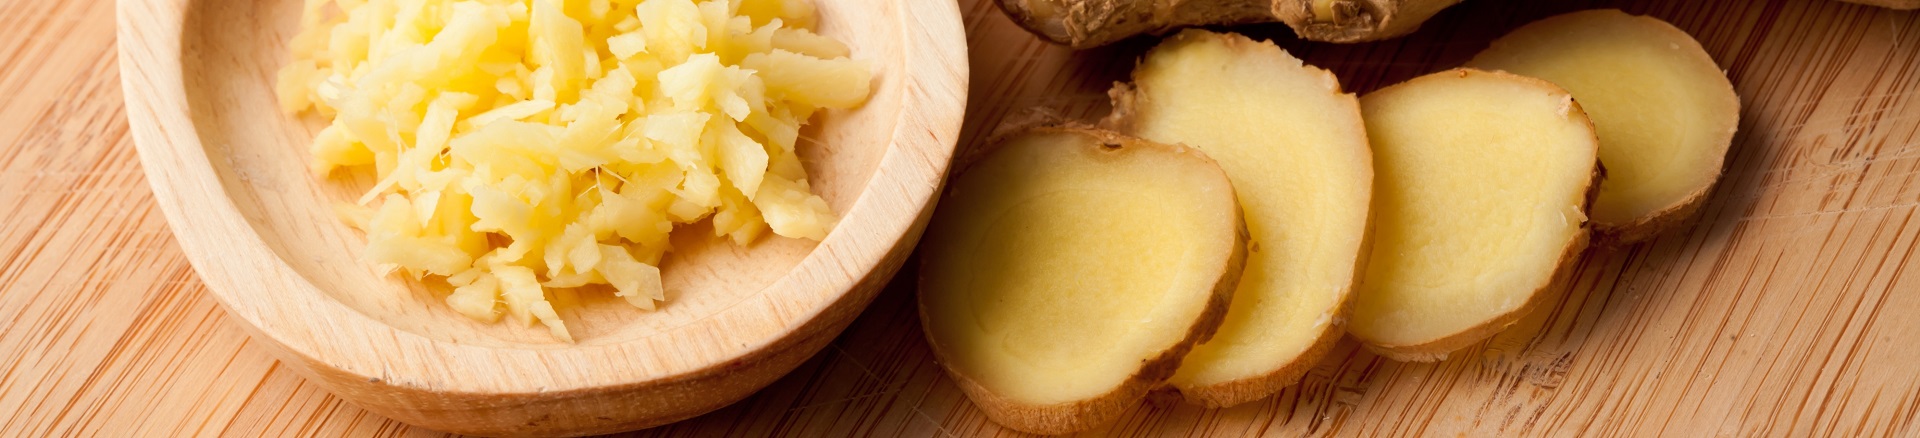 how to eat ginger for health benefits